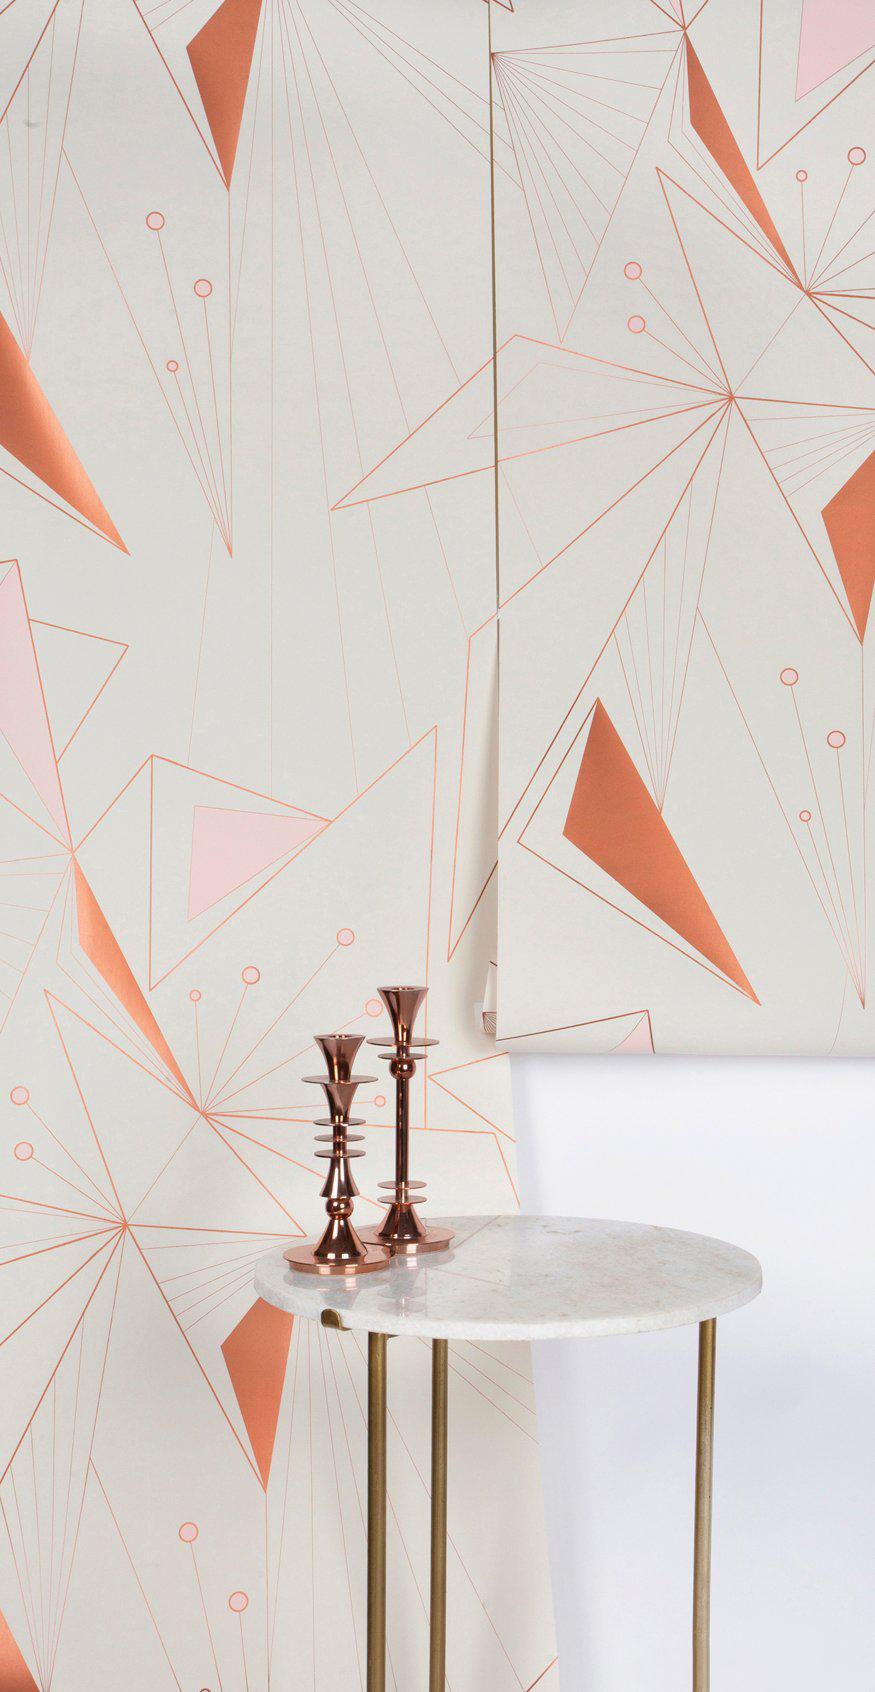 This modern and geometric wallpaper adds graphic warmth and texture to your walls in a soft color palette of metallic copper, peachy pink and off-white. It works well with Mid-Century Modern, Hollywood Regency, Art Deco and contemporary decor.

We